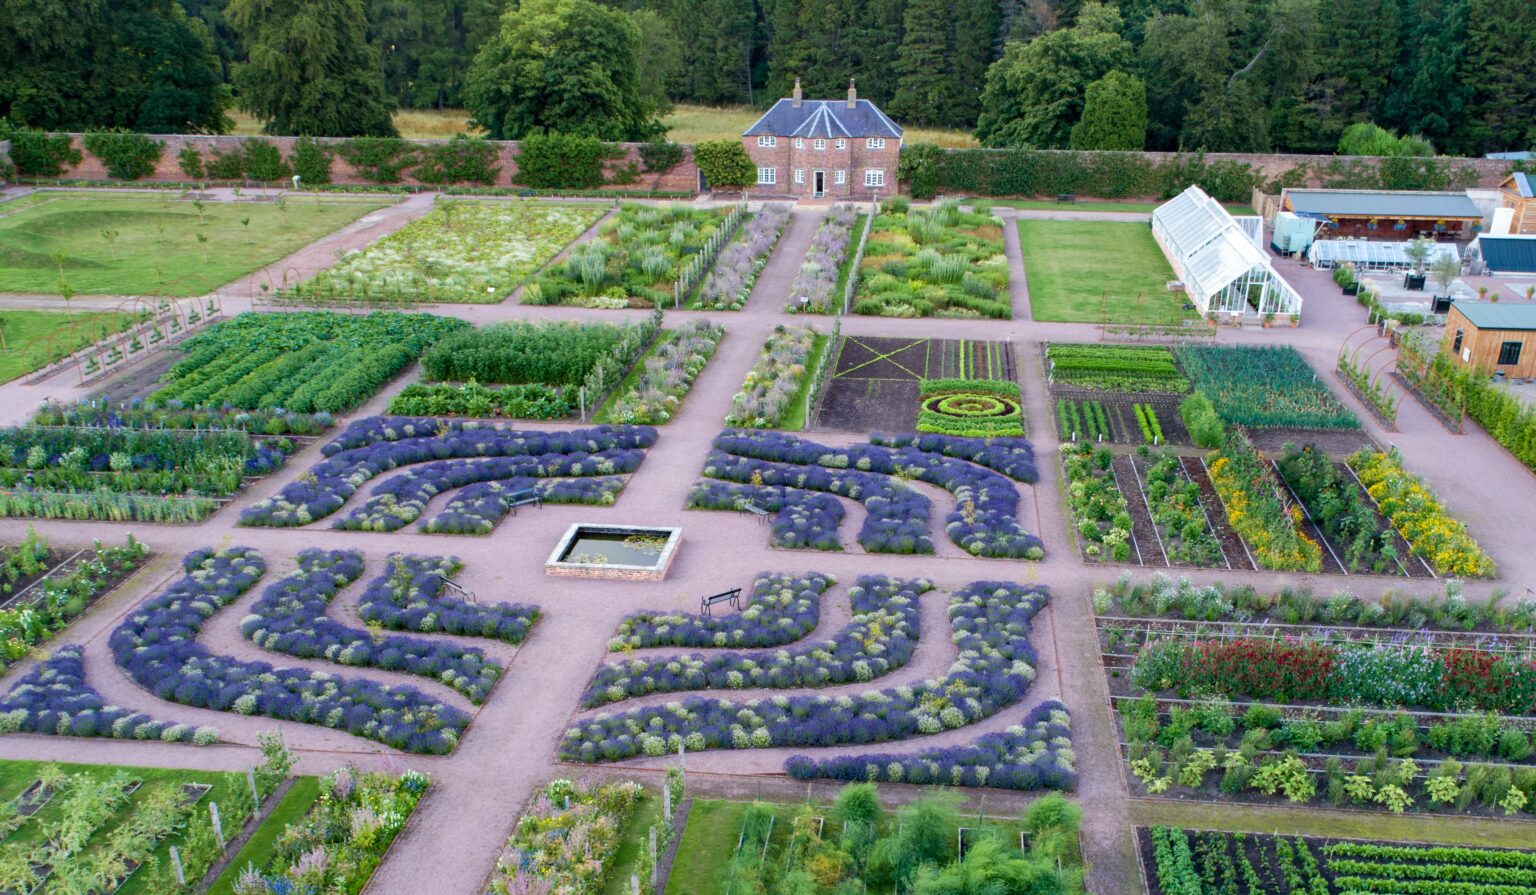 Aerial view of the elaborate cutting beds at Gordon Castle Walled Garden